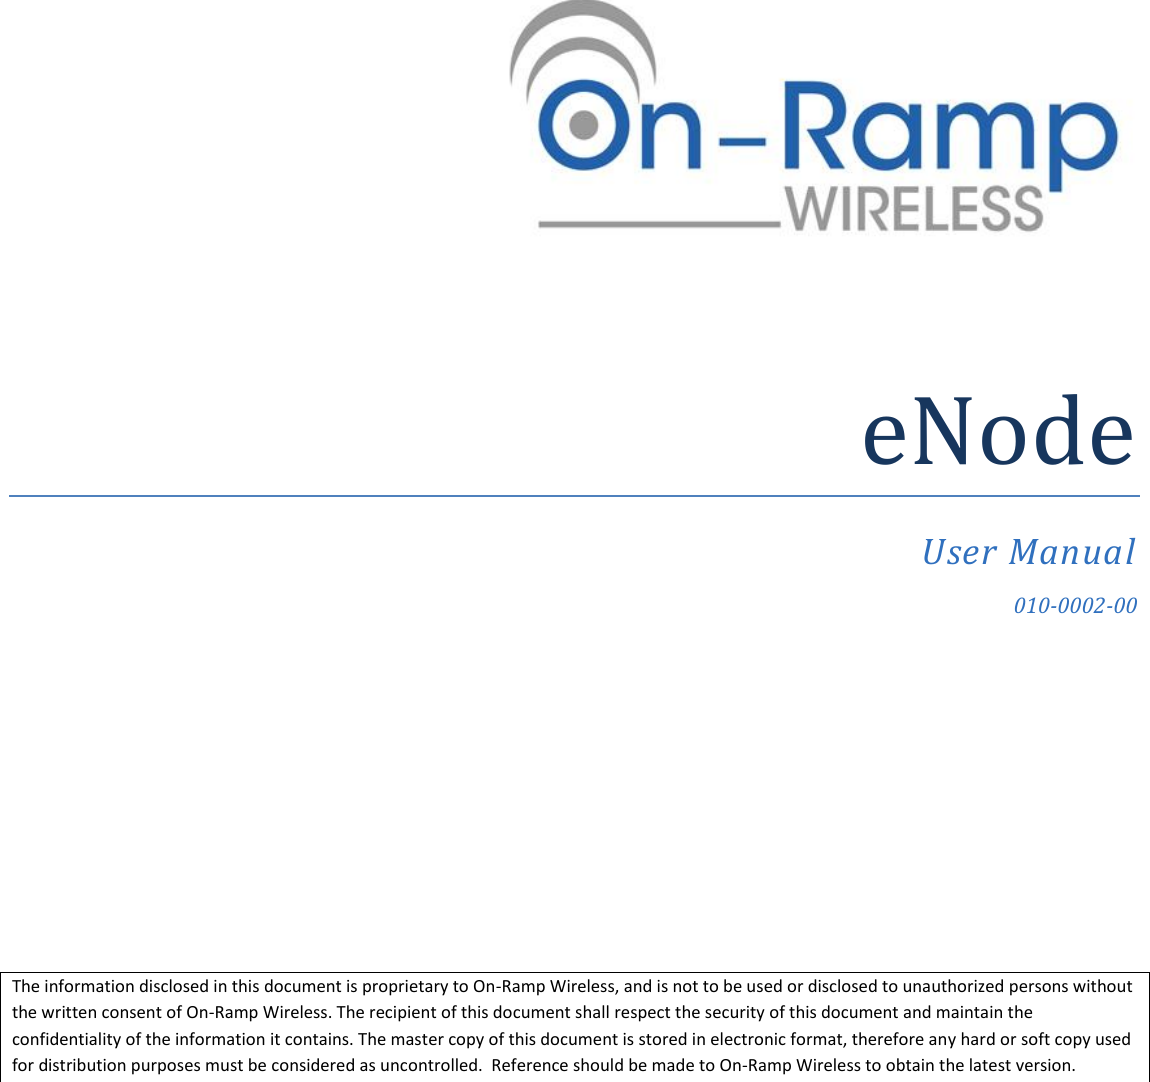  eNode User Manual 010-0002-00 The information disclosed in this document is proprietary to On-Ramp Wireless, and is not to be used or disclosed to unauthorized persons without the written consent of On-Ramp Wireless. The recipient of this document shall respect the security of this document and maintain the confidentiality of the information it contains. The master copy of this document is stored in electronic format, therefore any hard or soft copy used for distribution purposes must be considered as uncontrolled.  Reference should be made to On-Ramp Wireless to obtain the latest version. 